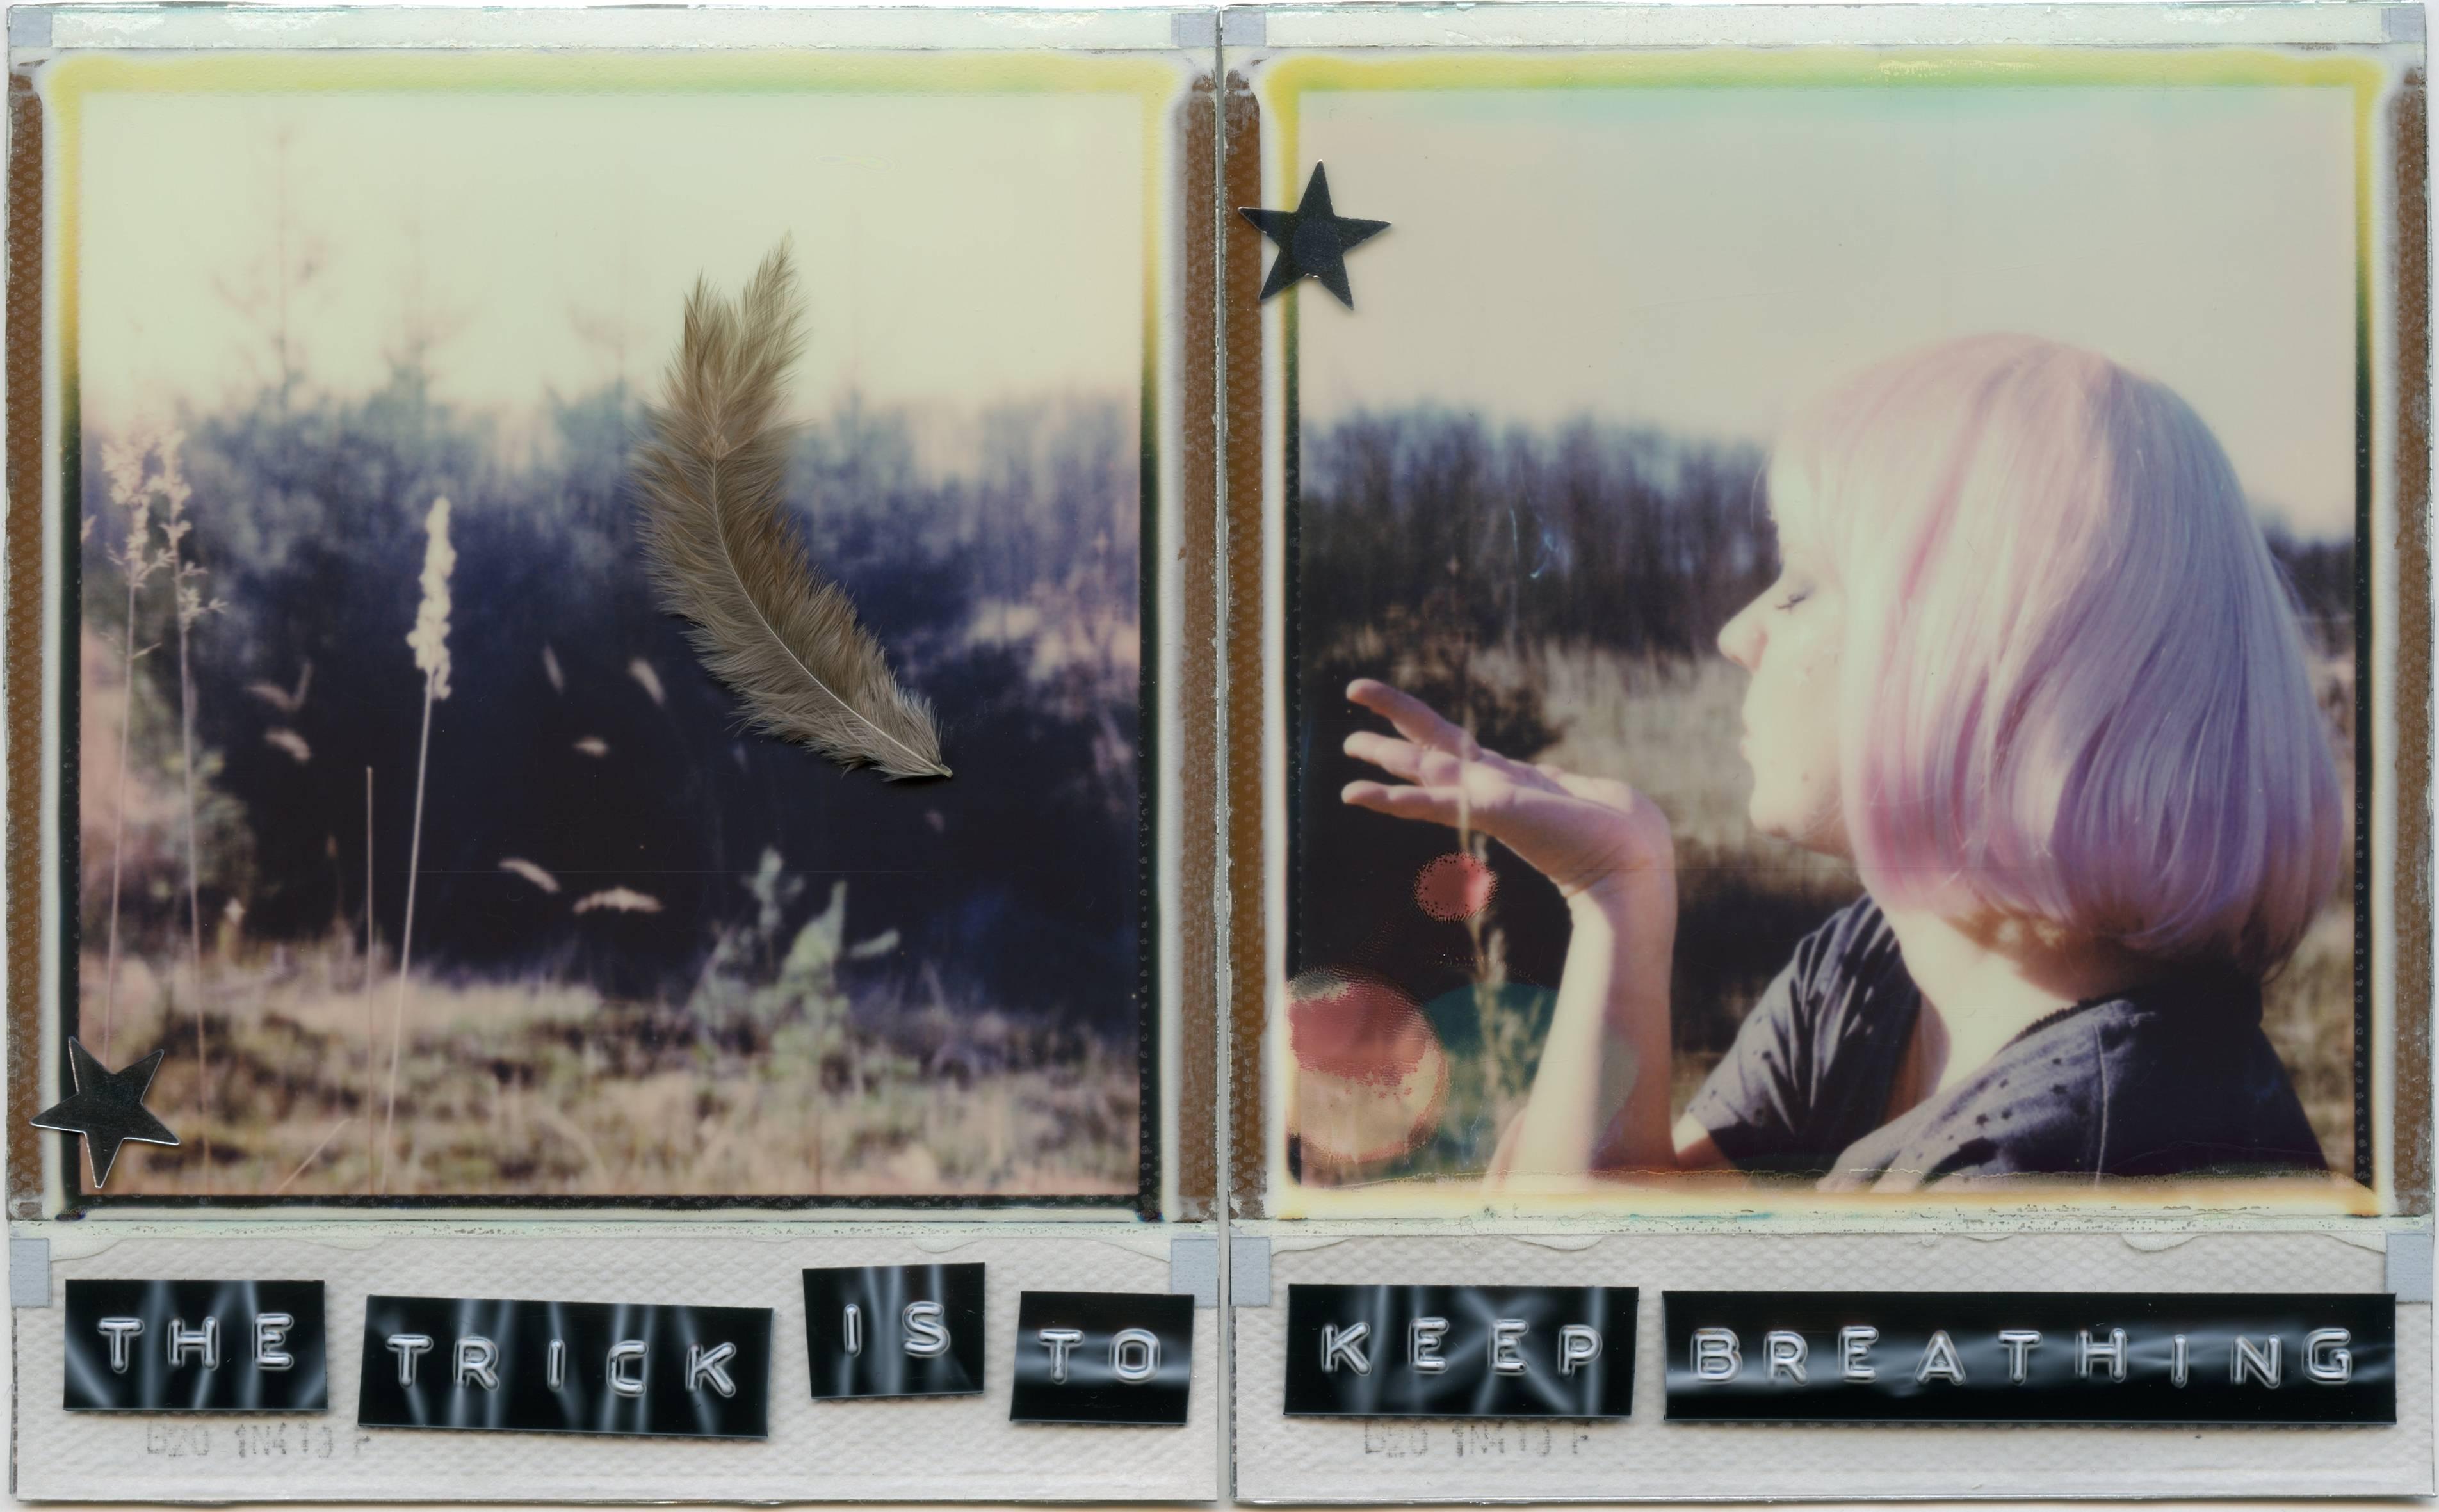 Julia Beyer Color Photograph - The Trick Is To Keep Breathing - based on 2 Polaroids